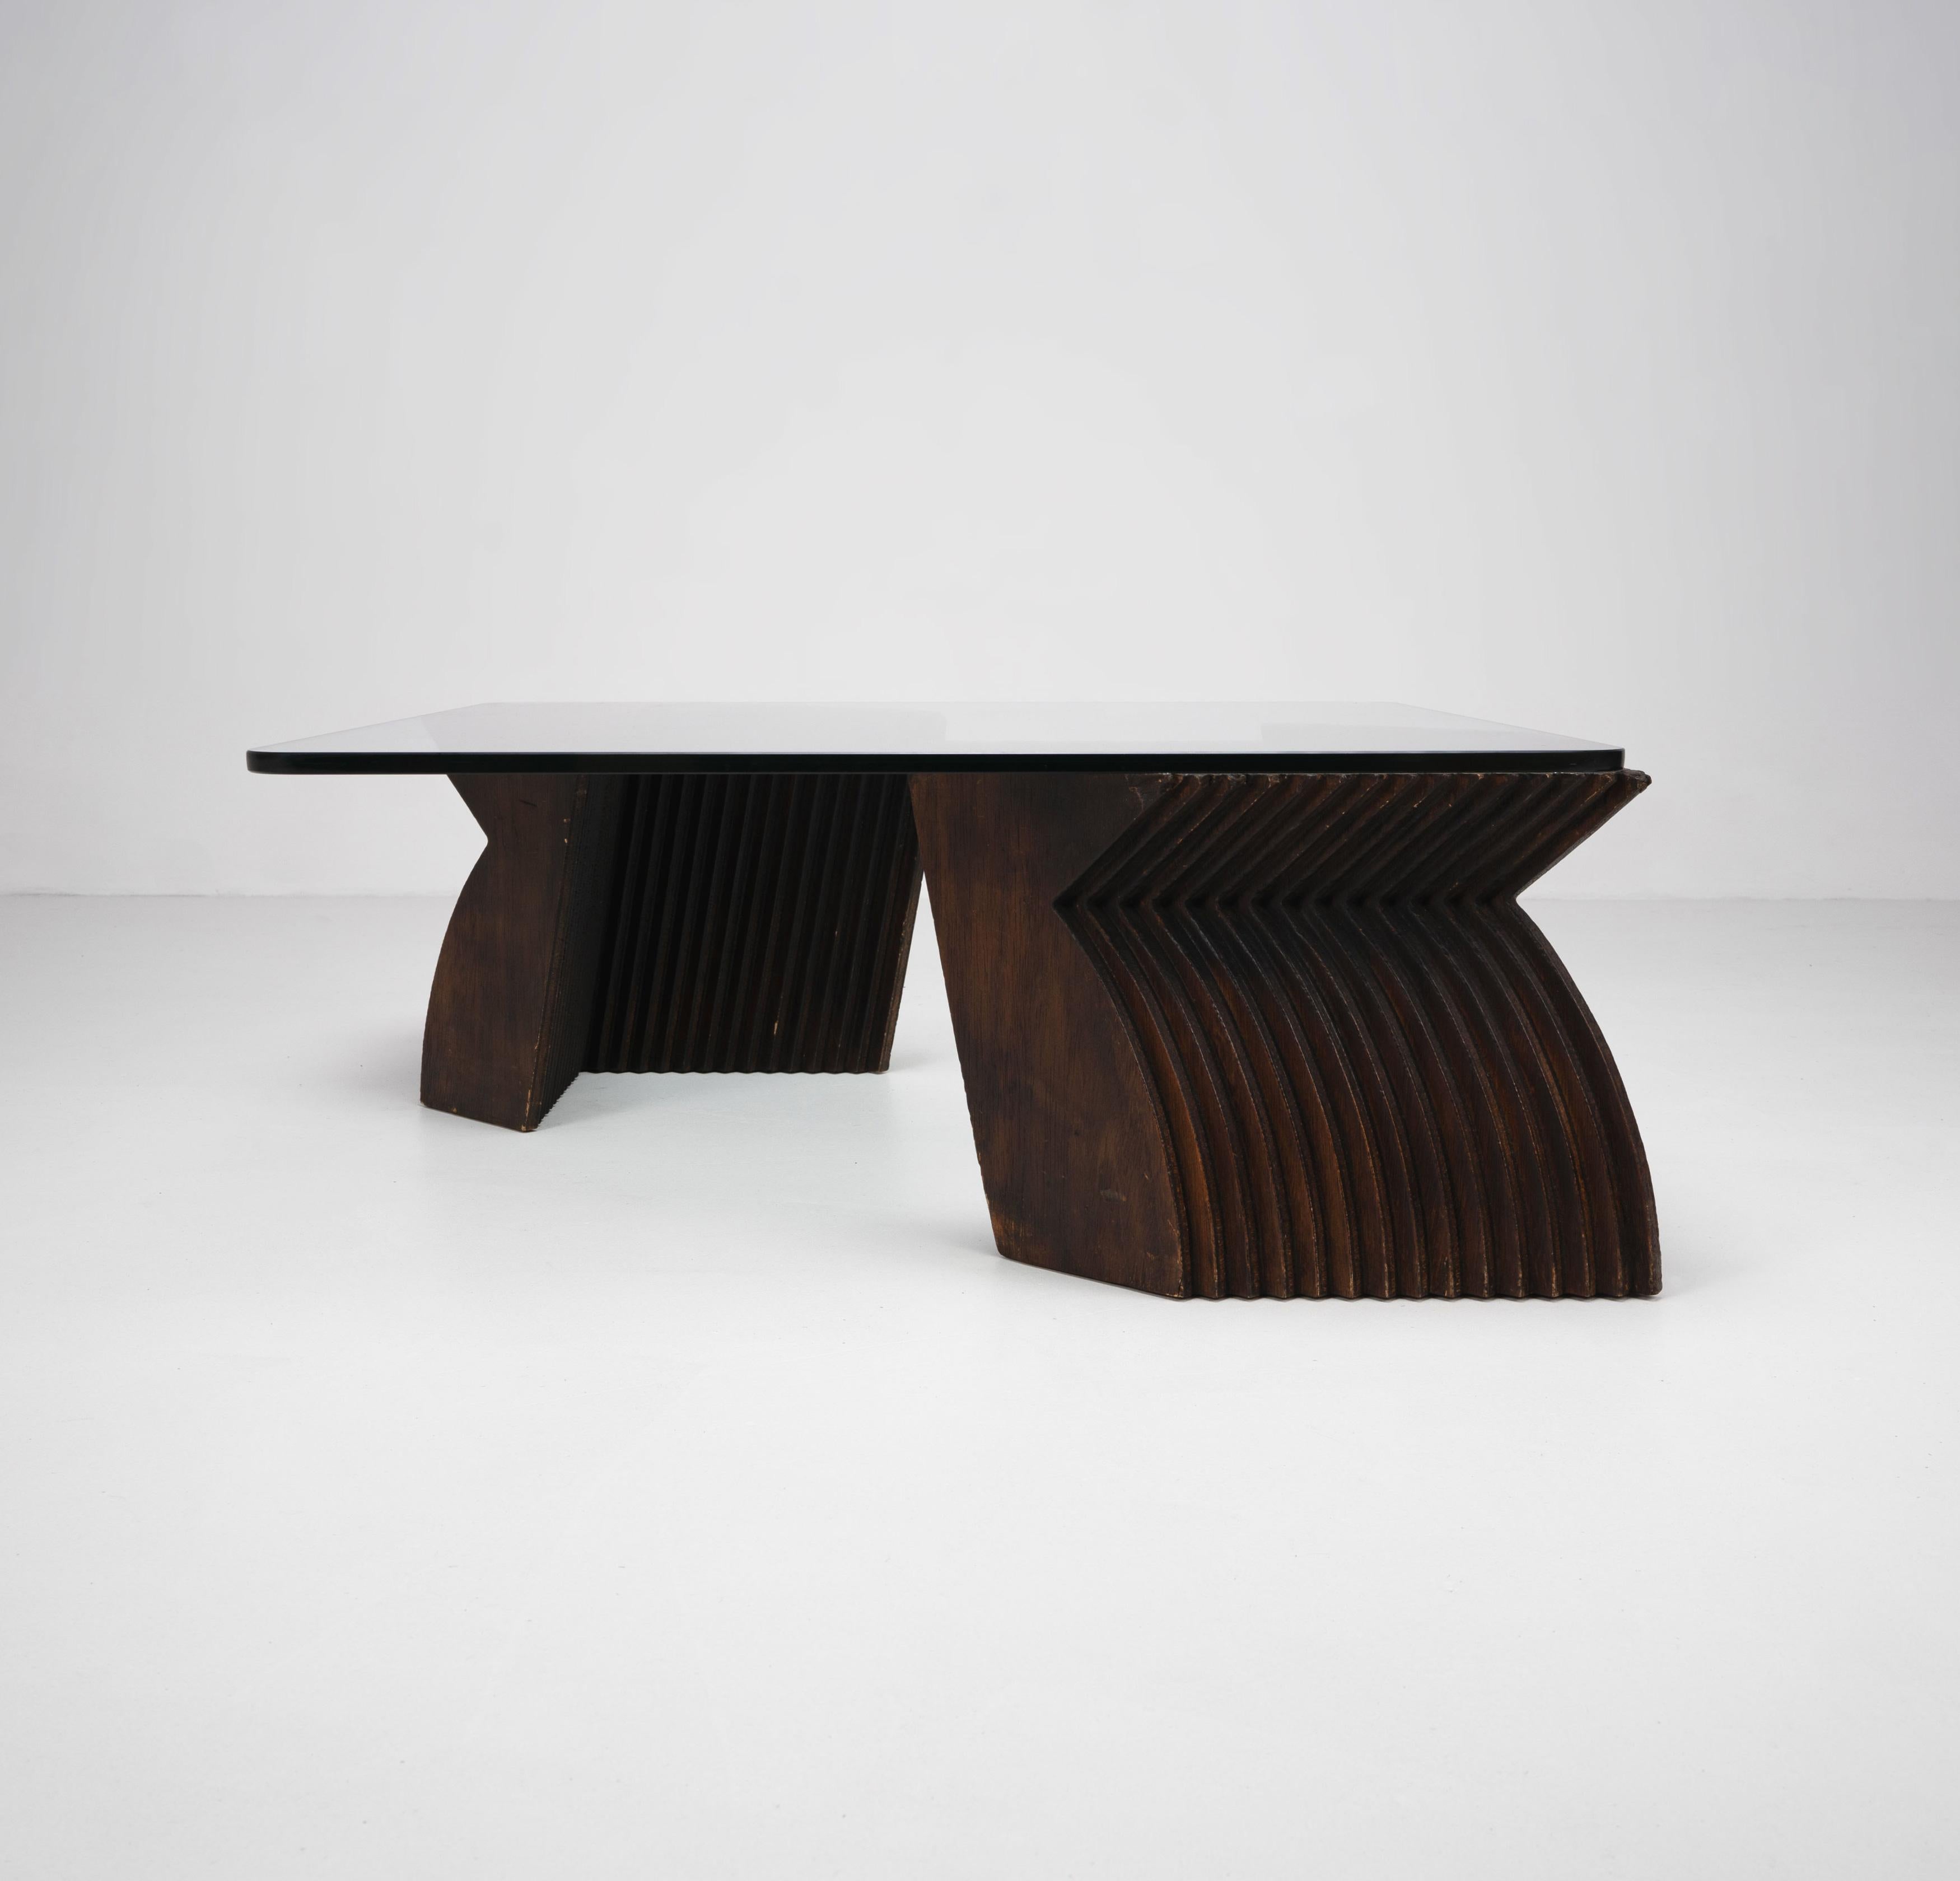 A late 20th Century coffee table composed from two sculptural base elements formed from layered, stained plywood pieces creating Futurist style forms. 

Dimensions (cm, approx):
Height: 37
Width: 89.5
Depth: 89.5

Condition: Fair condition for year